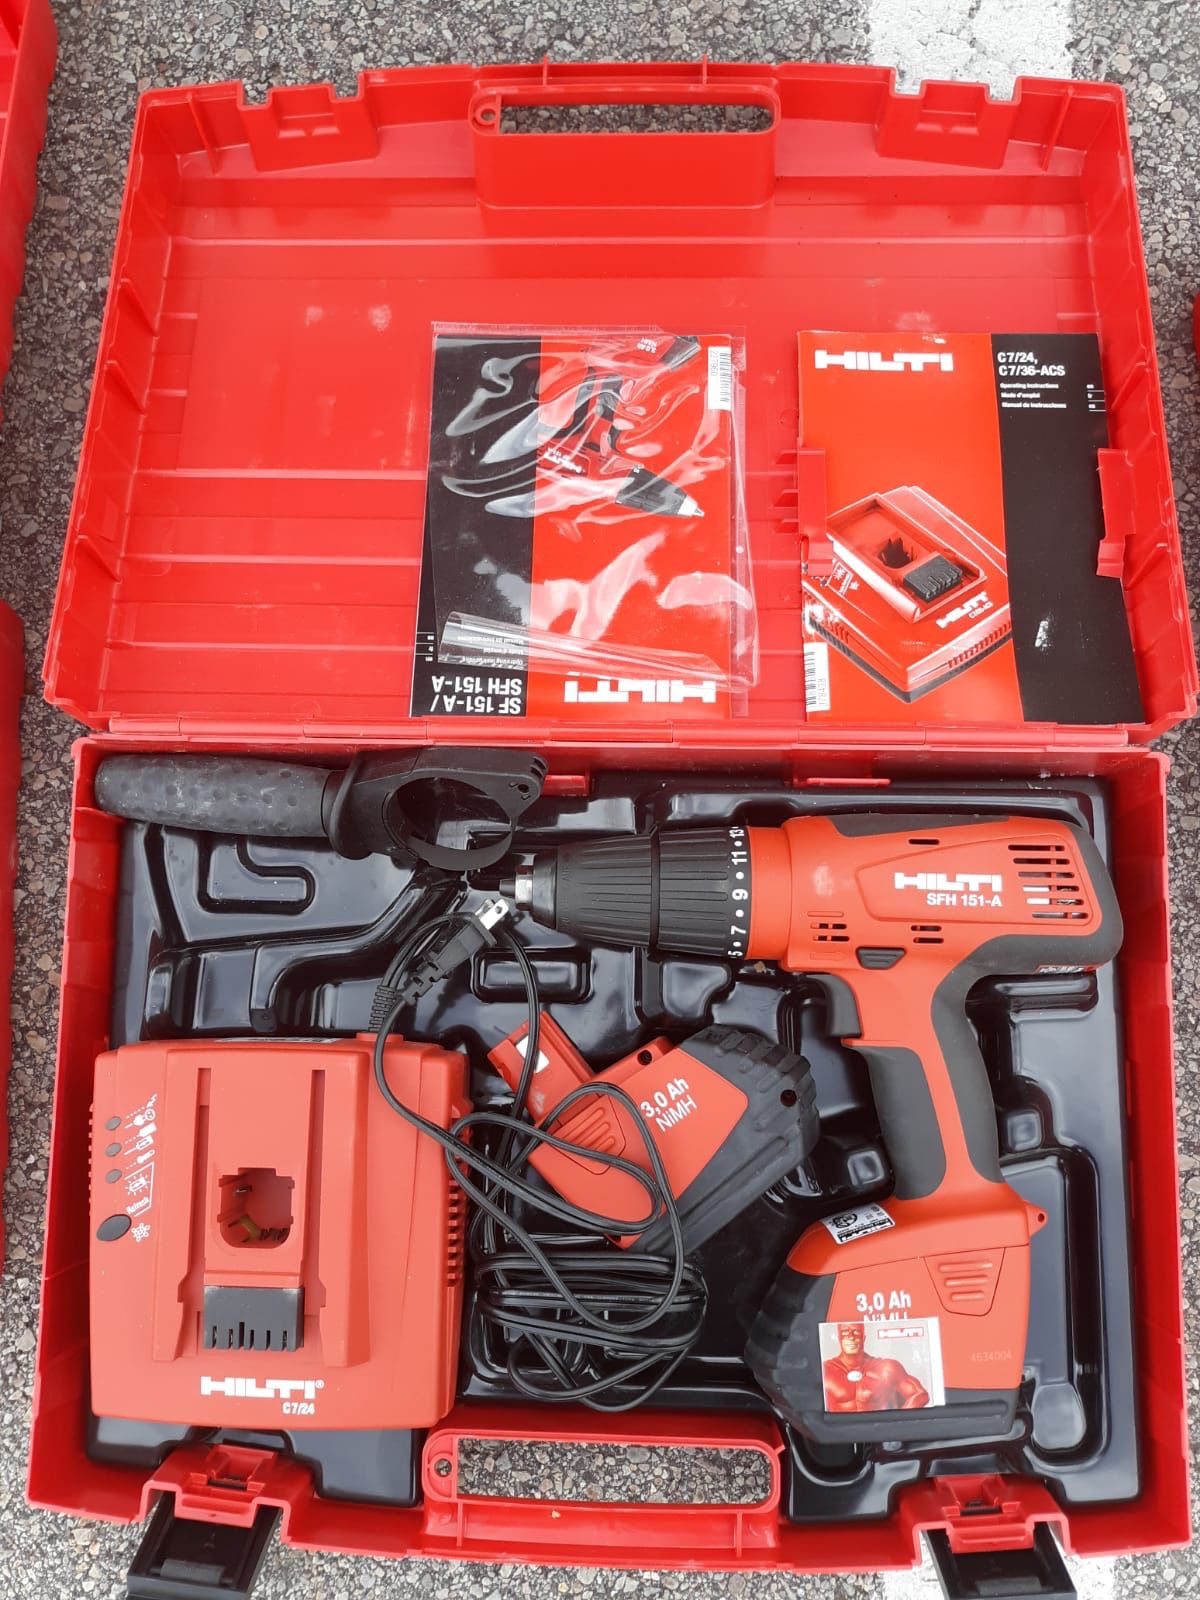 In great working condition, includes its original protective hard case, electric power tool, hammer drill setting